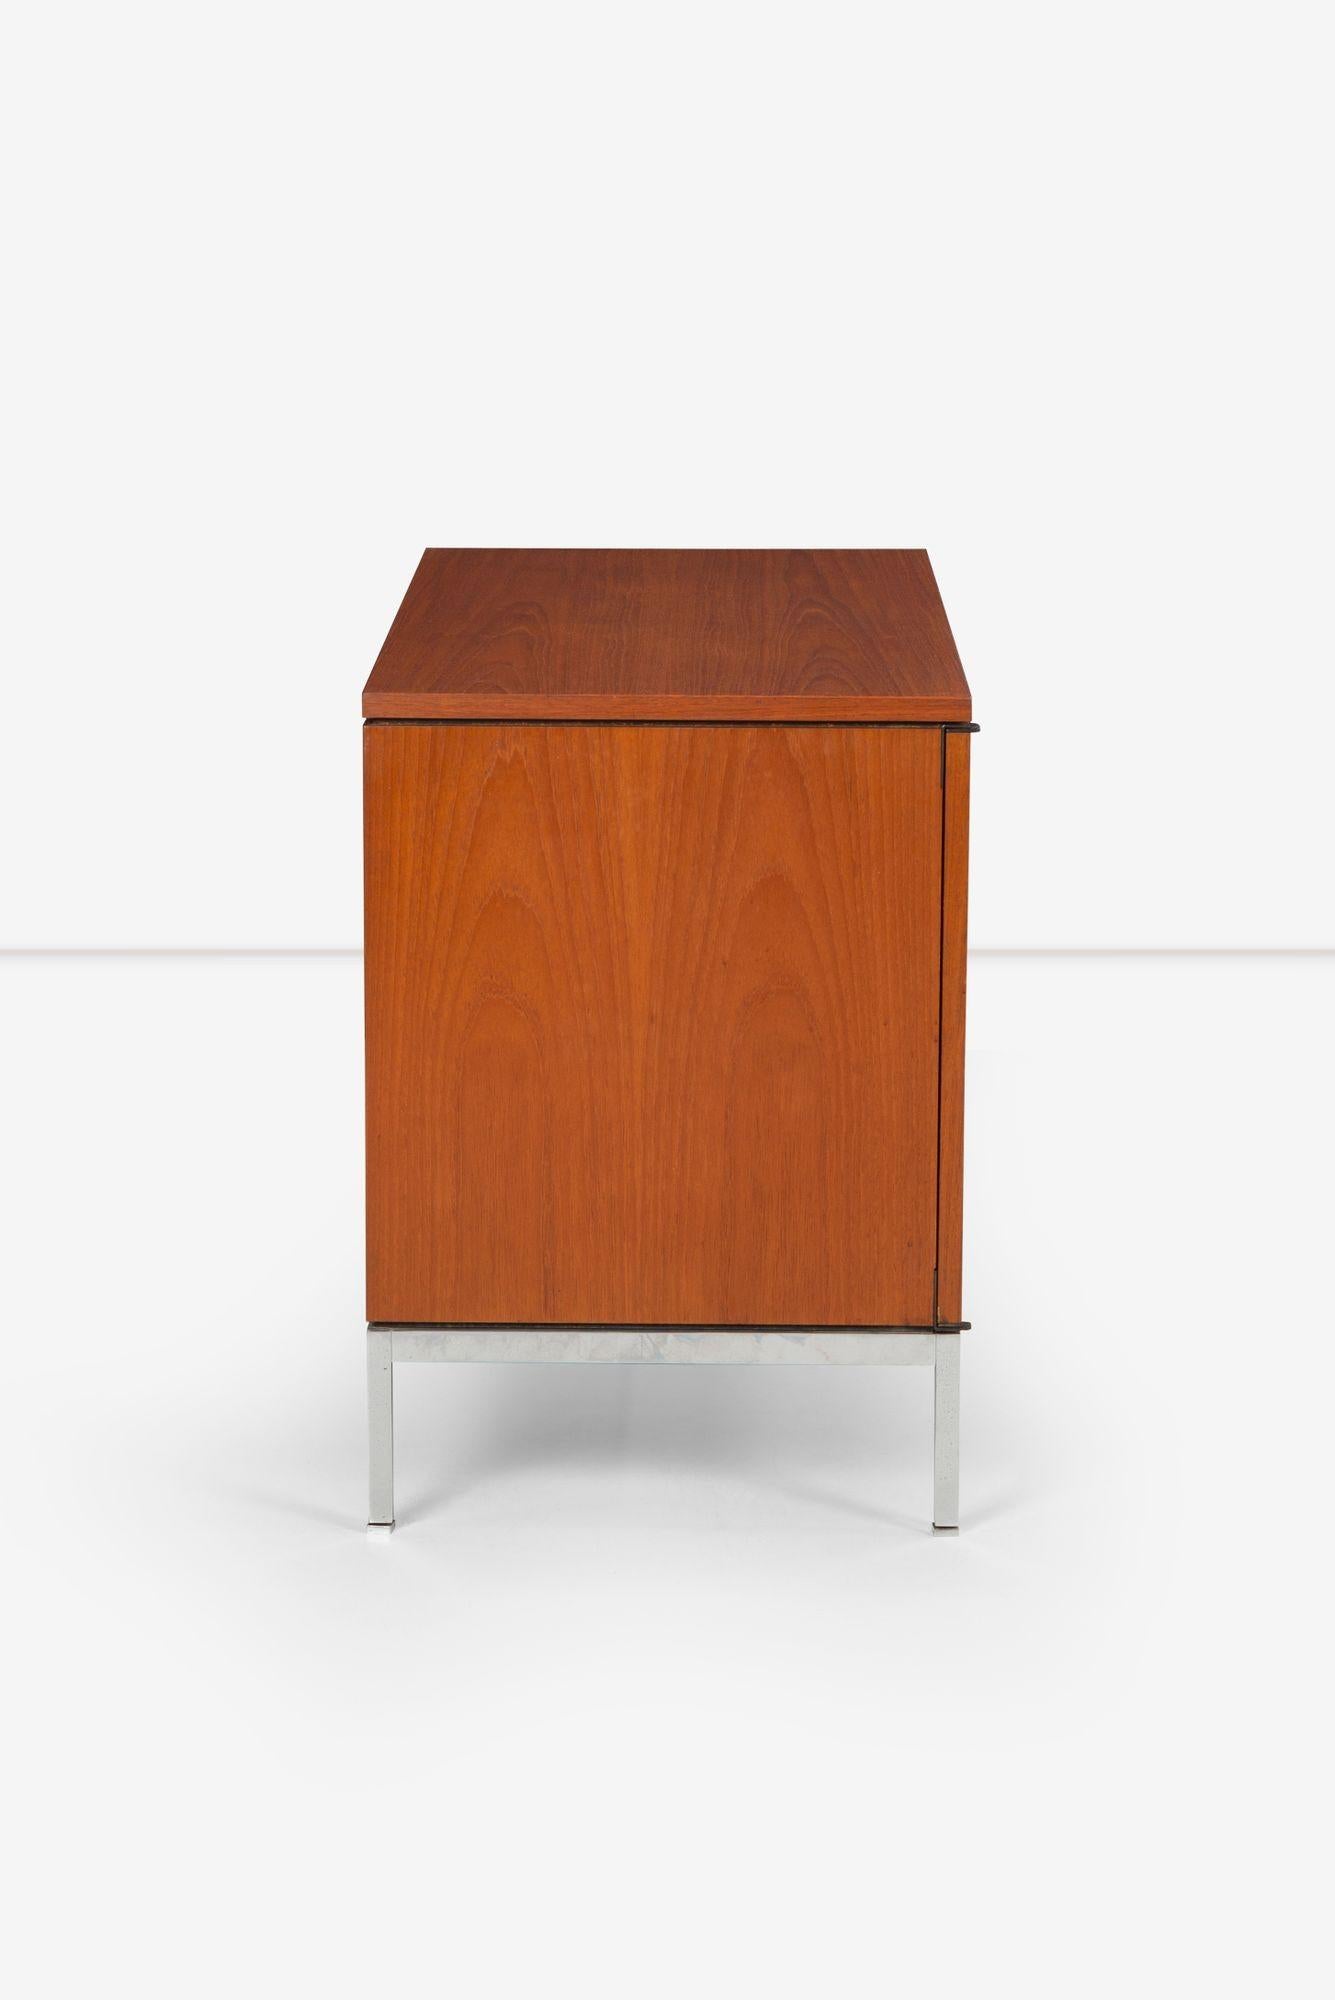 Florence Knoll Two-Door Cabinet in Teak-Wood In Good Condition For Sale In Chicago, IL